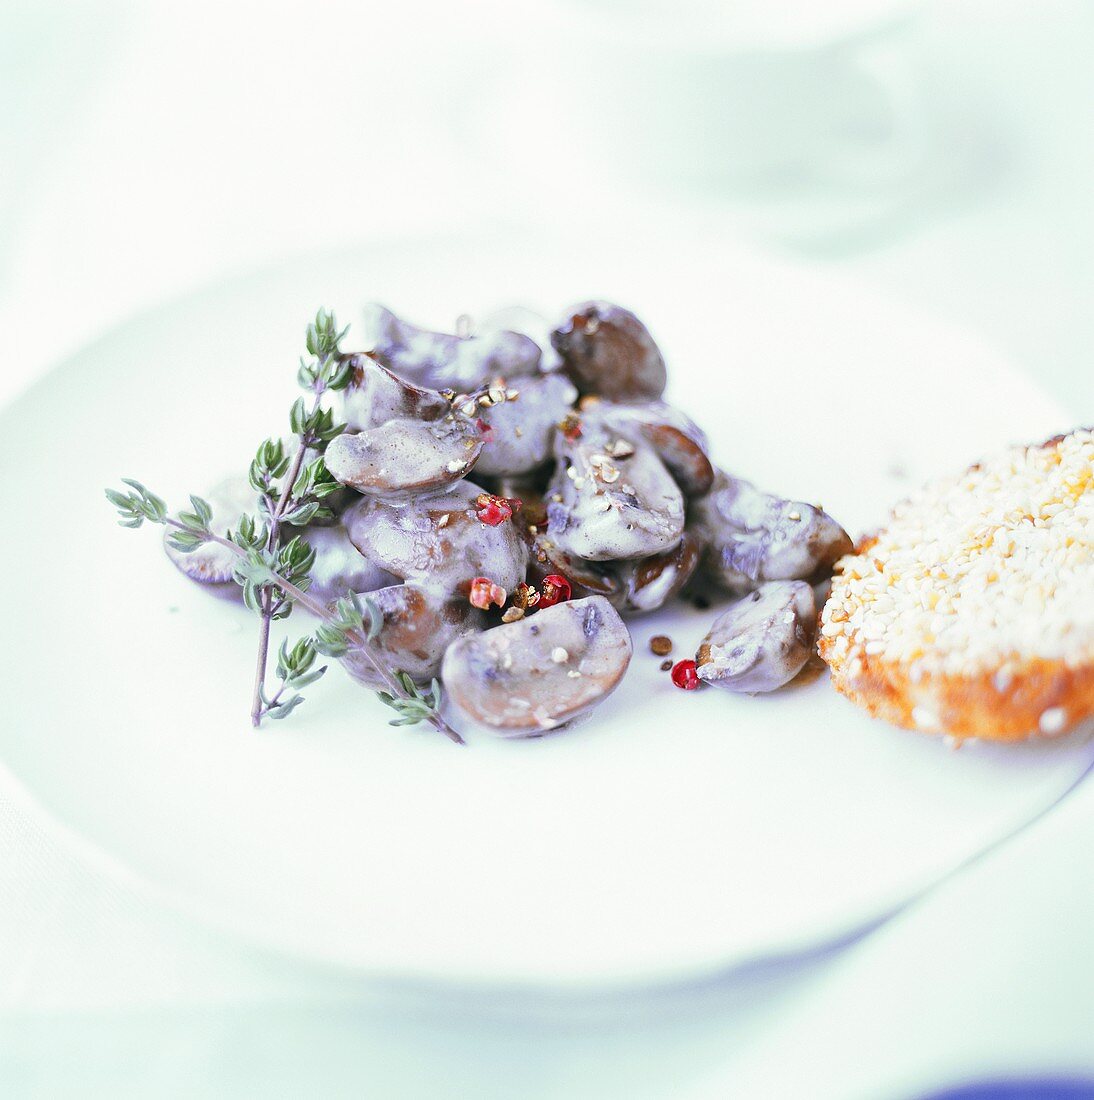 Button mushrooms with red peppercorns in cream sauce